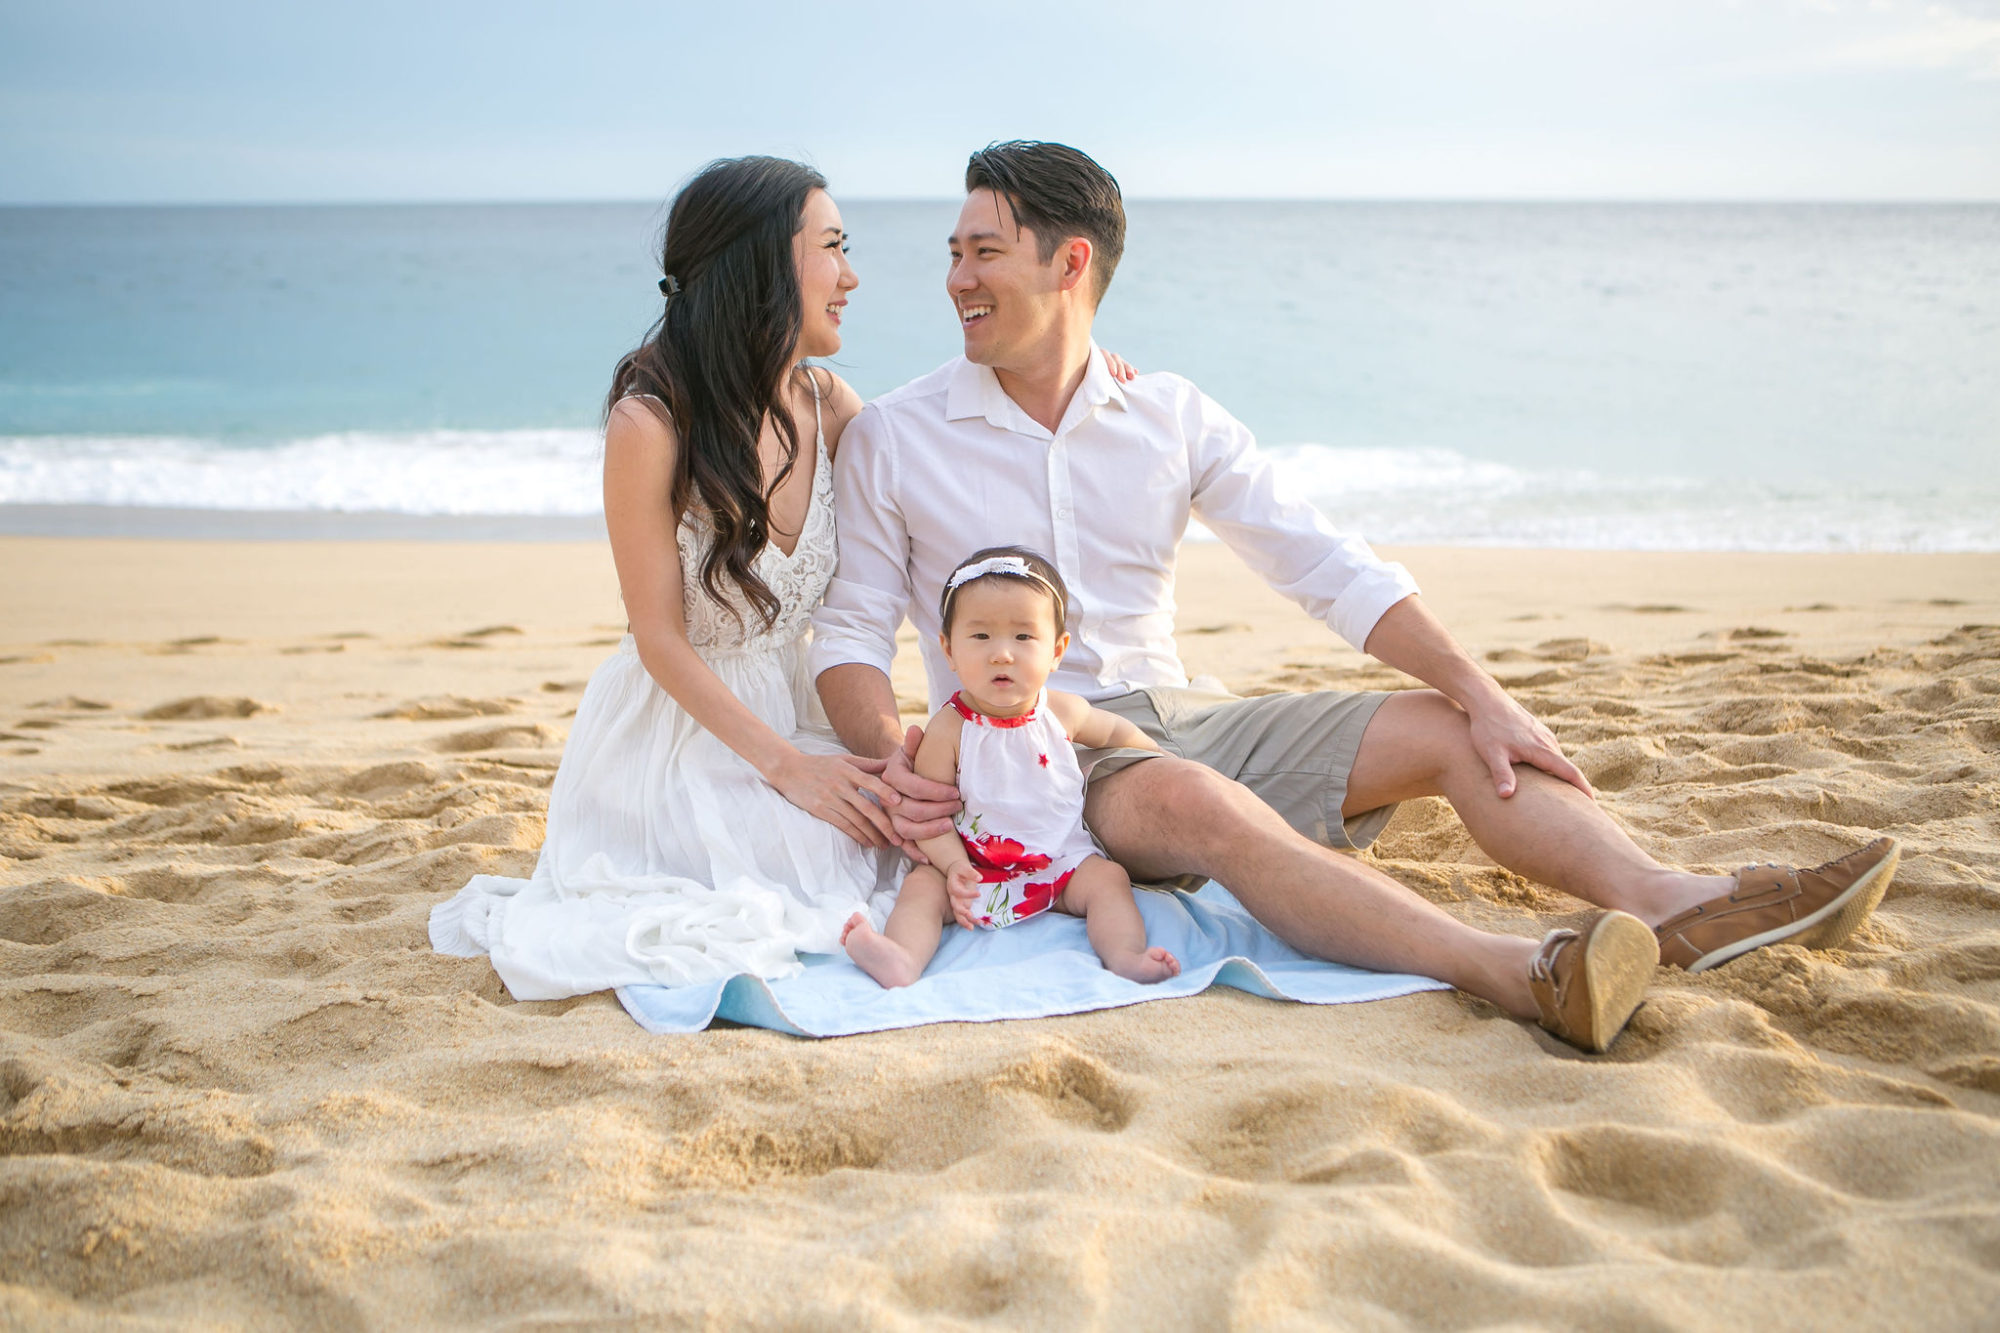 Precious Moments: An Endearing Photoshoot at the Grand Solmar Resort